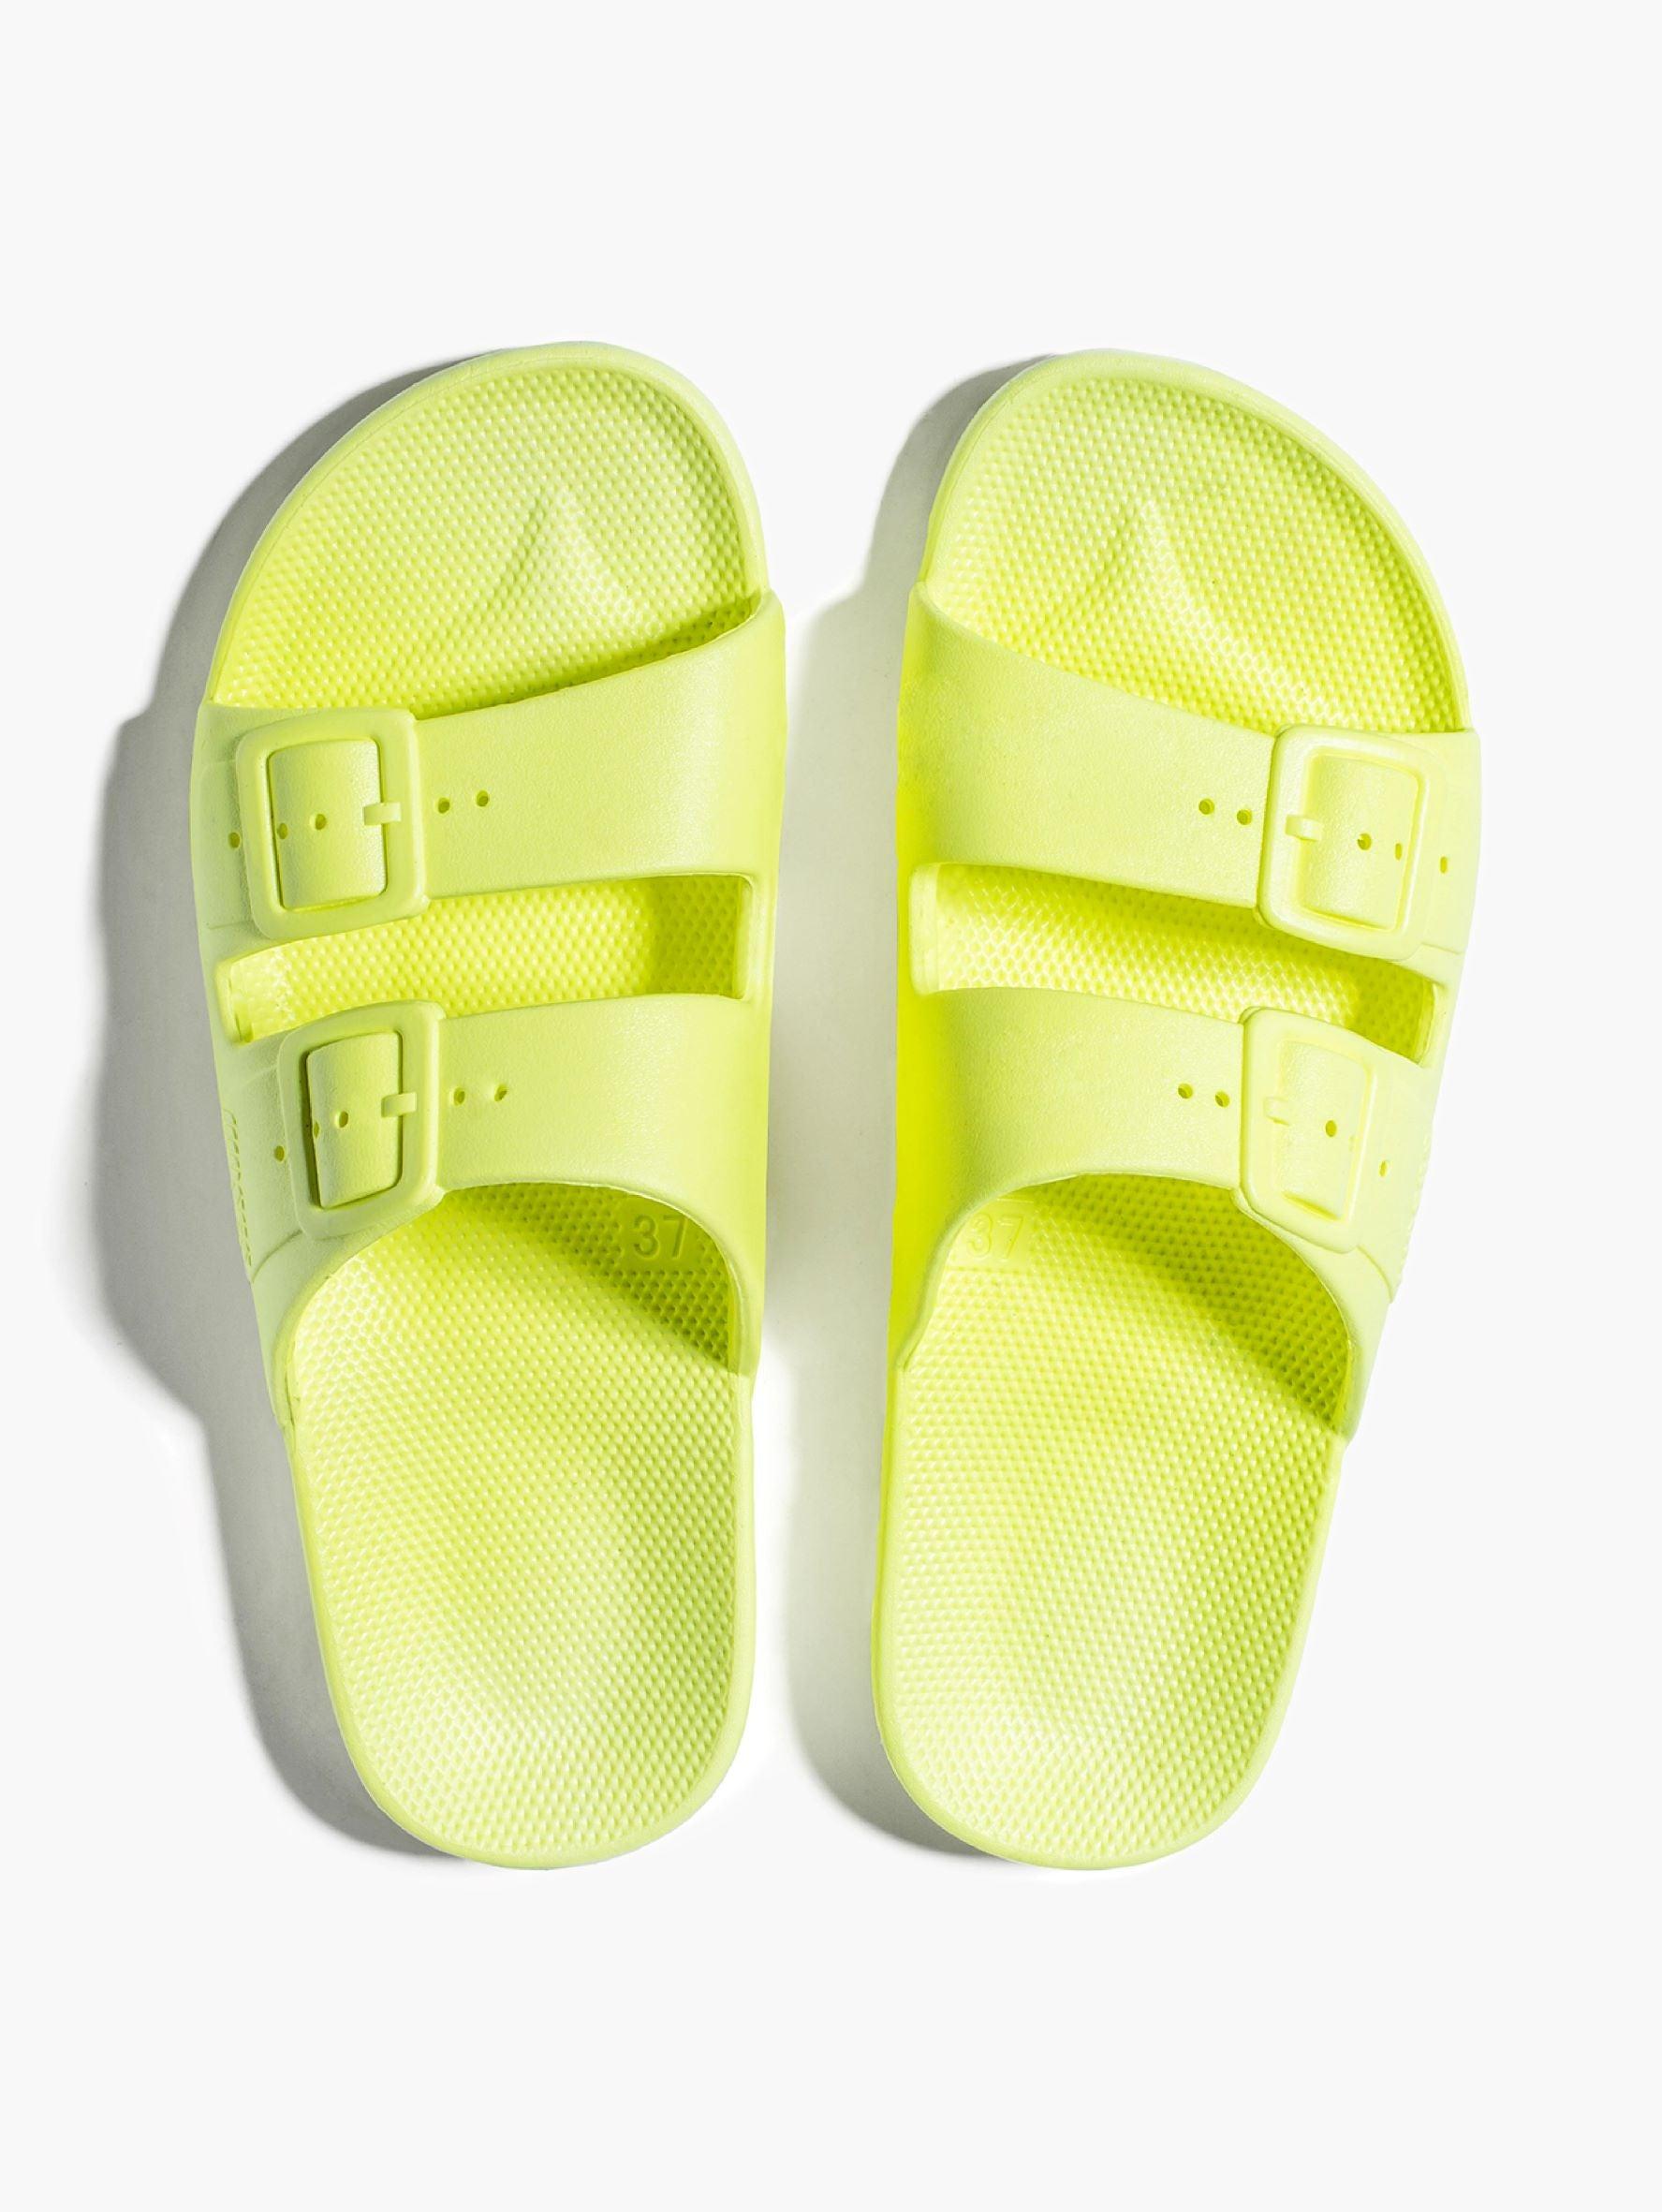 FREEDOM MOSES Sandal Yellow Lyst